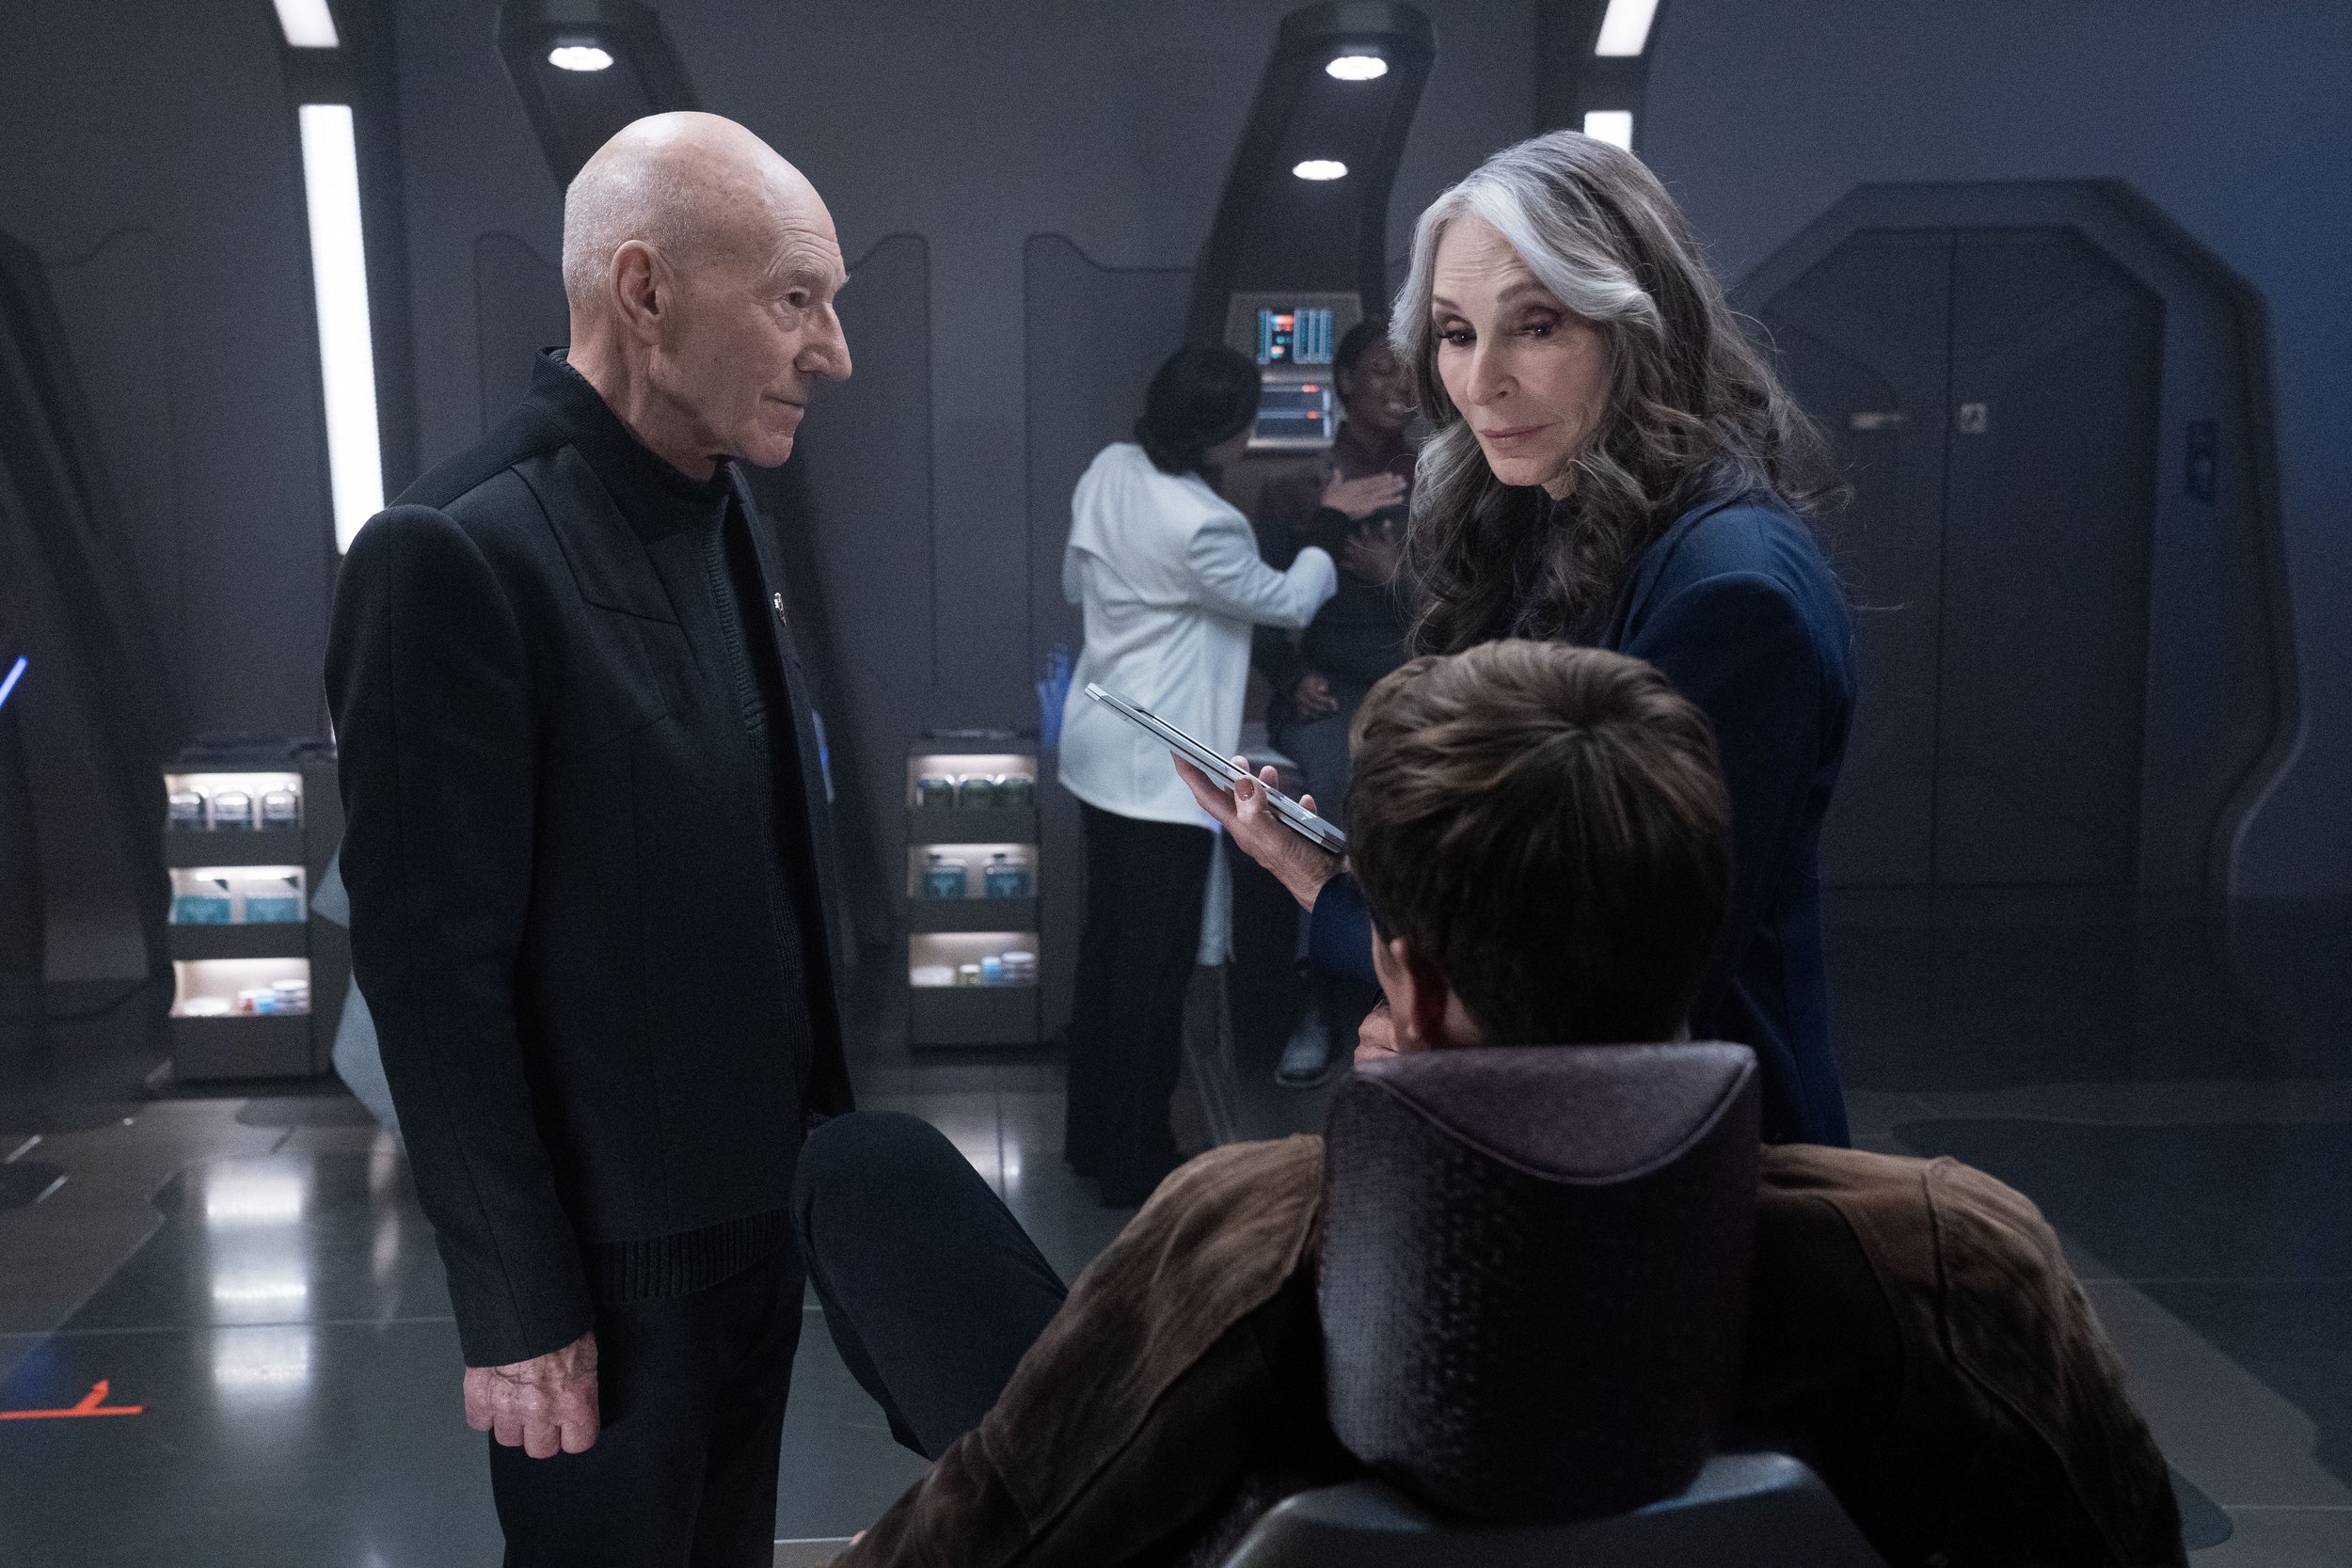   Patrick Stewart  as Picard,  Ed Speleers  as Jack Crusher and  Gates McFadden  as Dr. Beverly Crusher.  Photo Credit: Monty Brinton /Paramount+.  